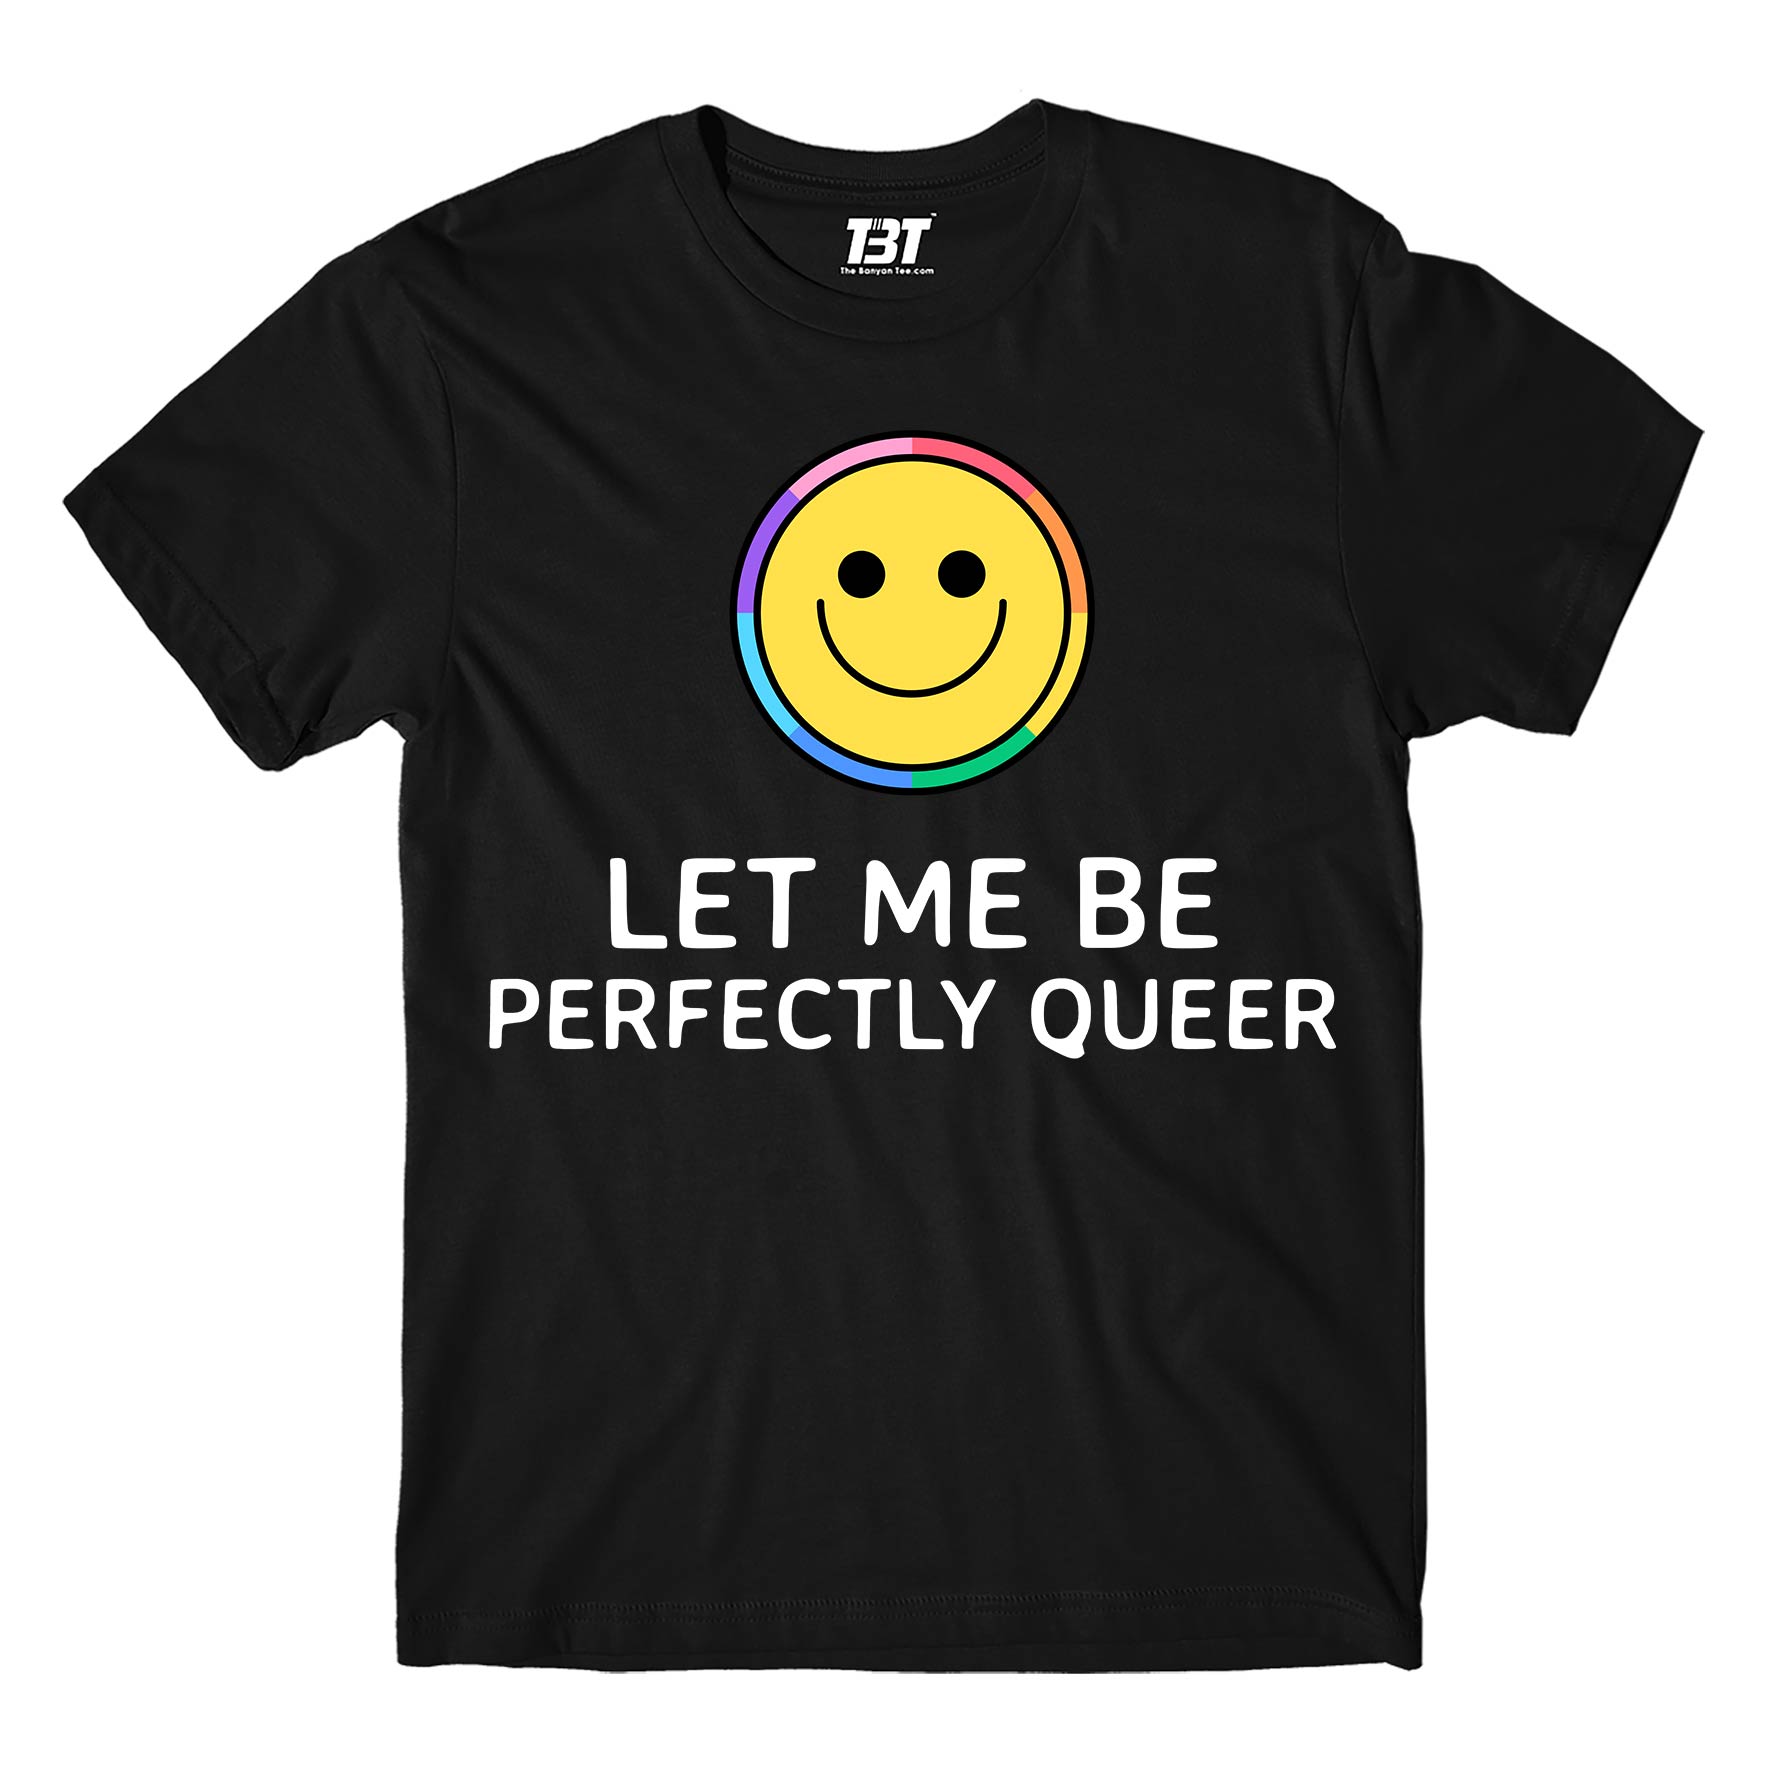 pride let me be perfectly queer t-shirt printed graphic stylish buy online india the banyan tee tbt men women girls boys unisex black - lgbtqia+